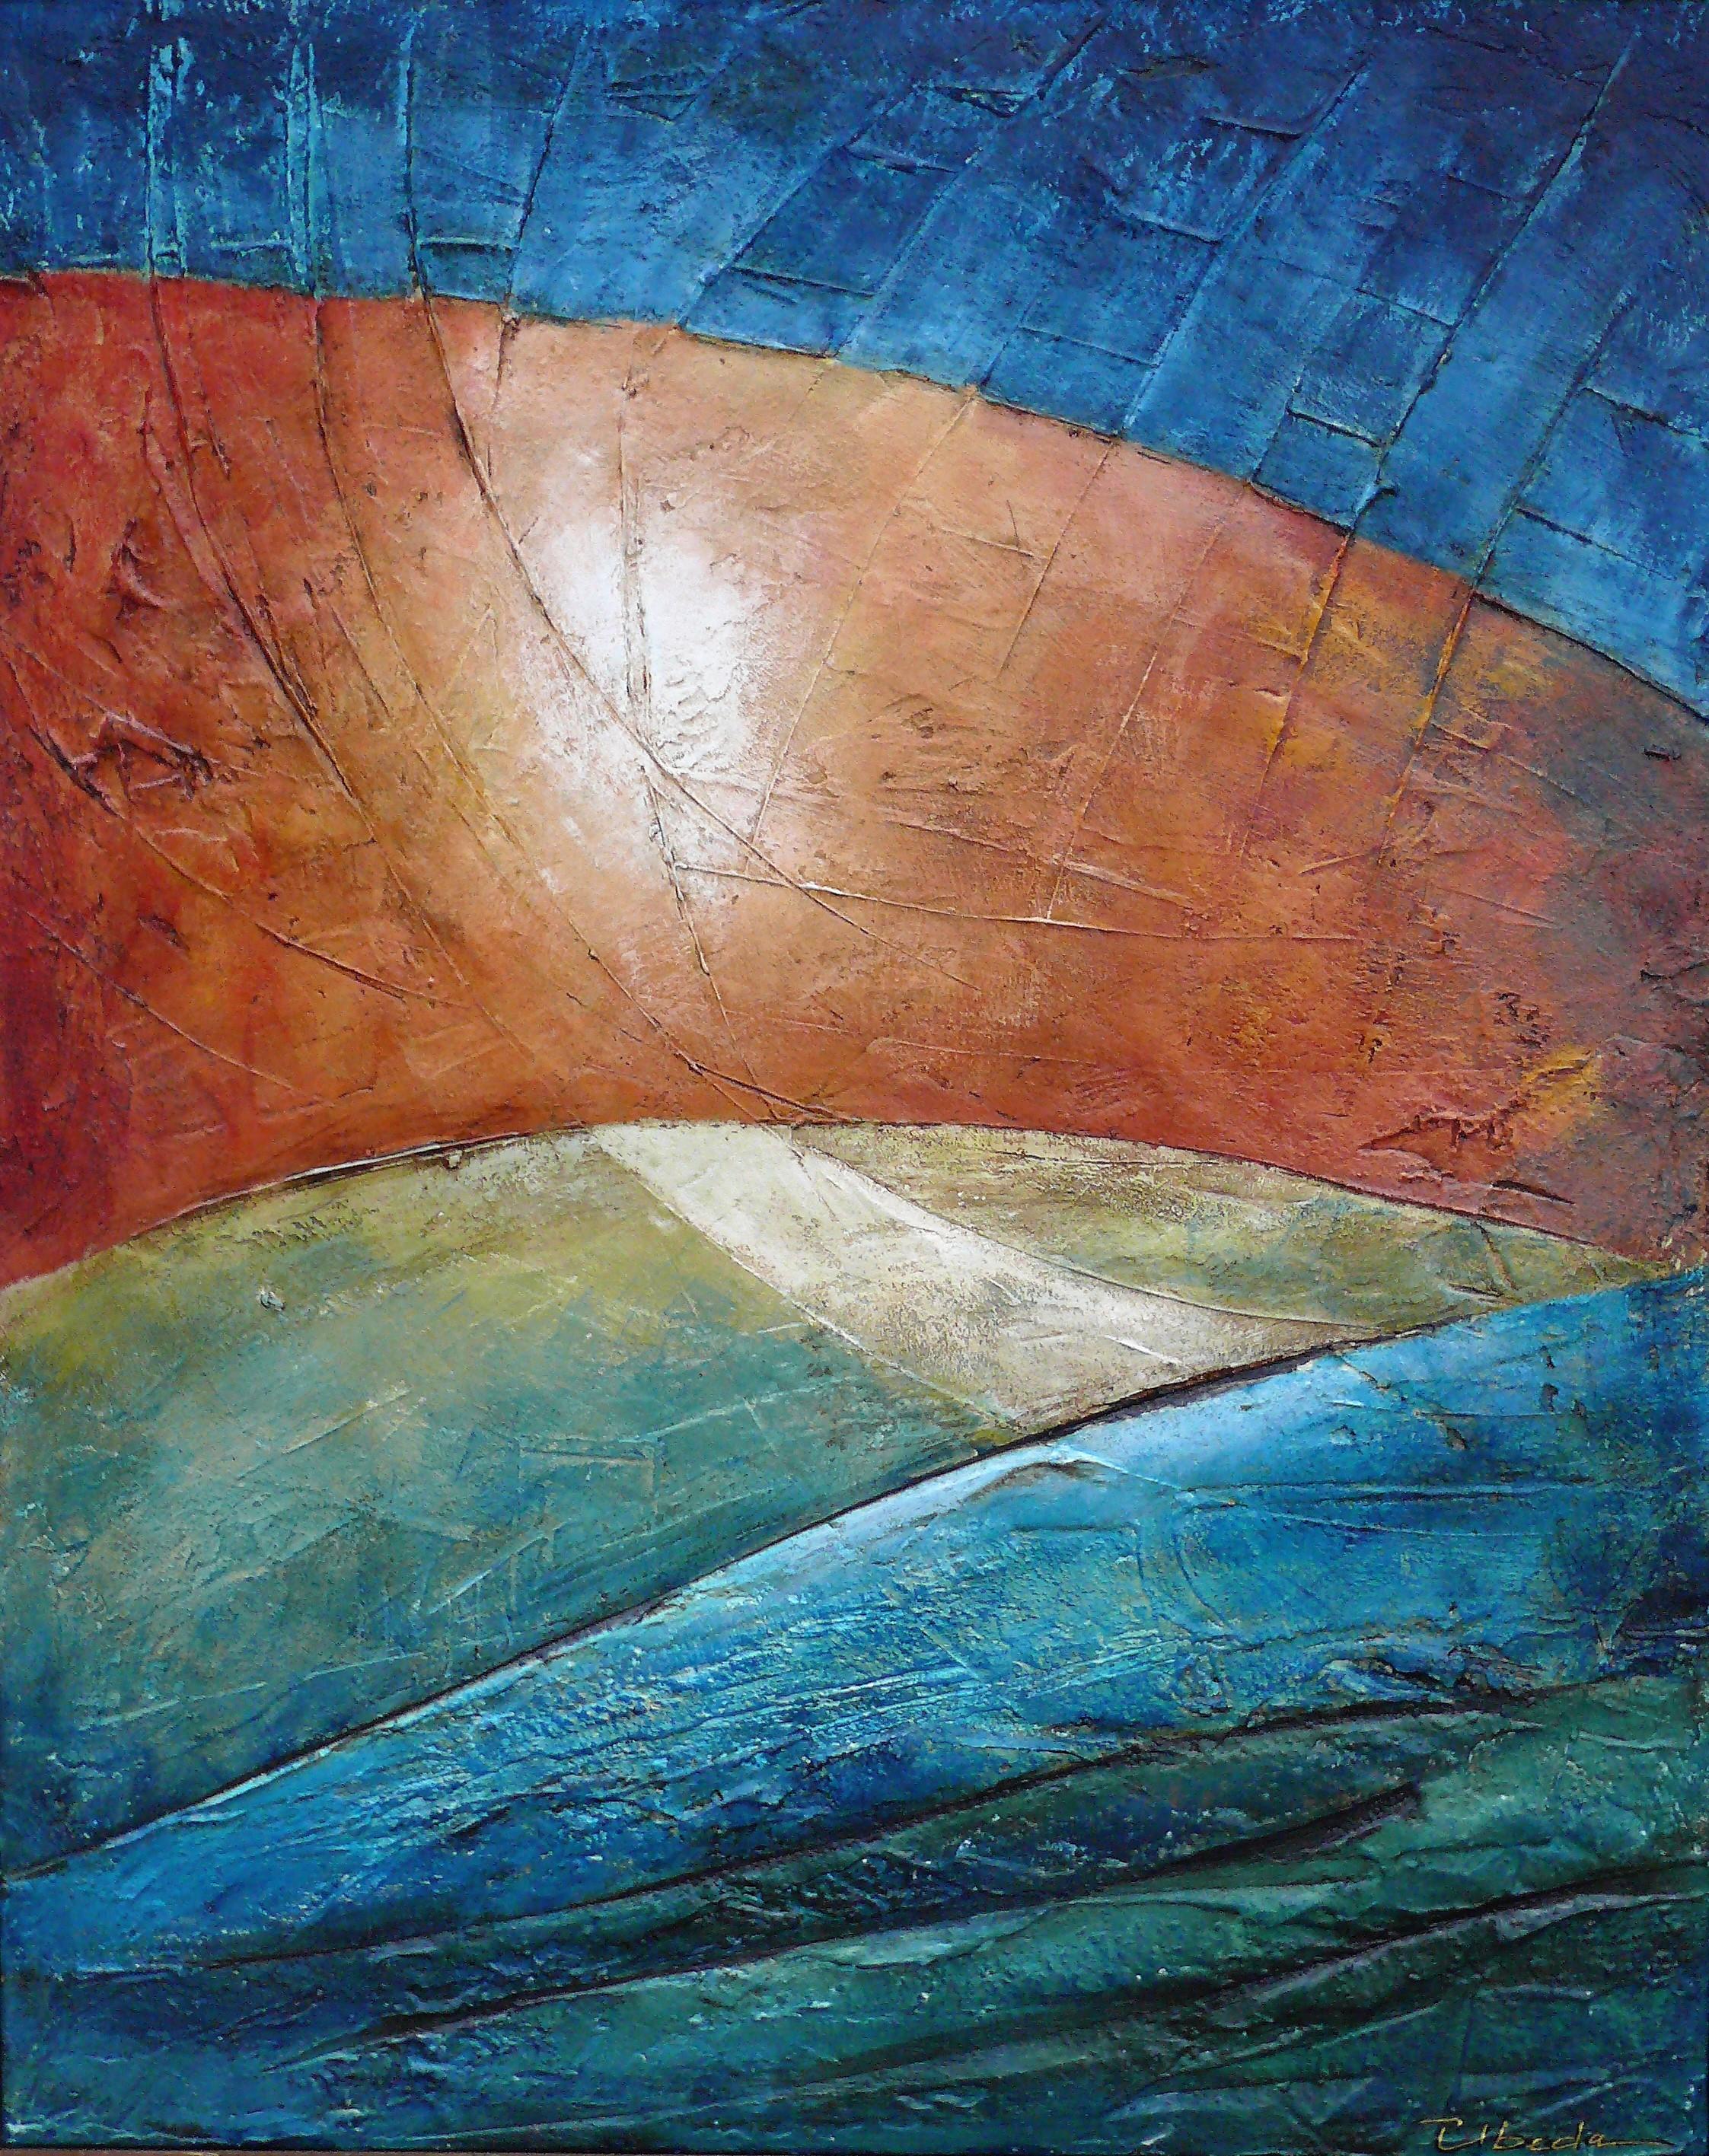 Ángel Luis Úbeda Abstract Painting - Sunsets. Úbeda Modern Abstract Landscape . Acrylic mixed media on canvas